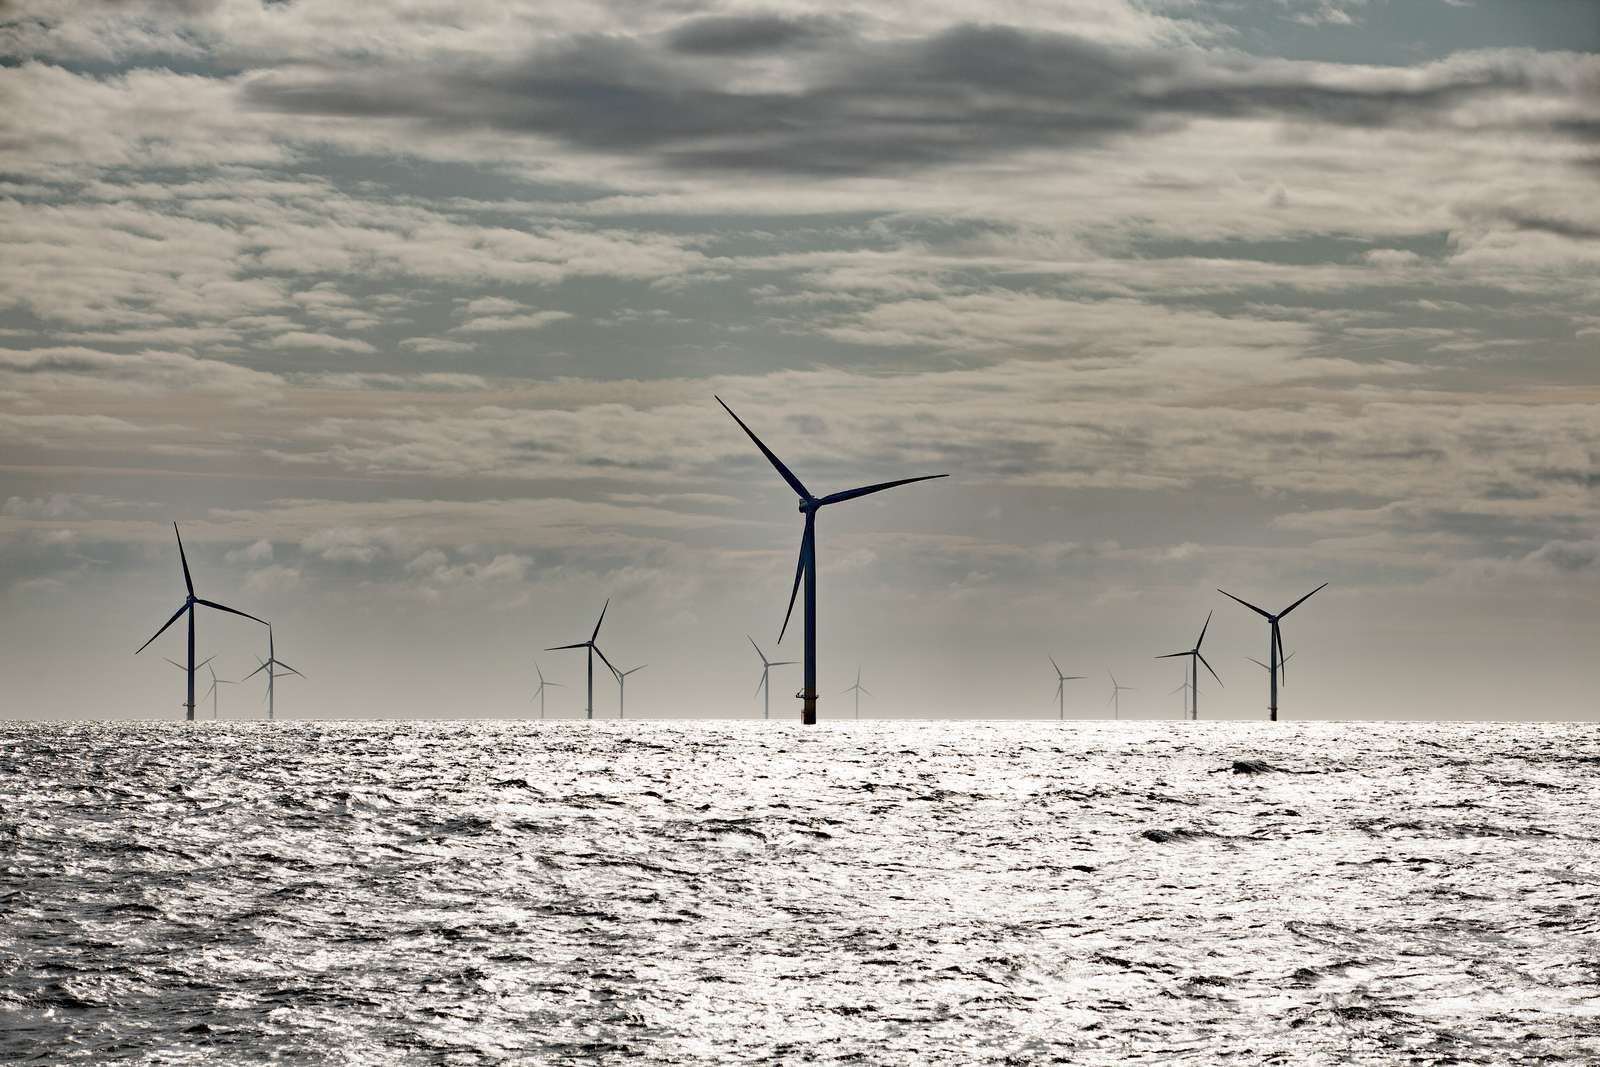 Ørsted, one of the consortium members, is developing the world's largest offshore wind farm, Hornsea One,120 km off the Yorkshire coast.